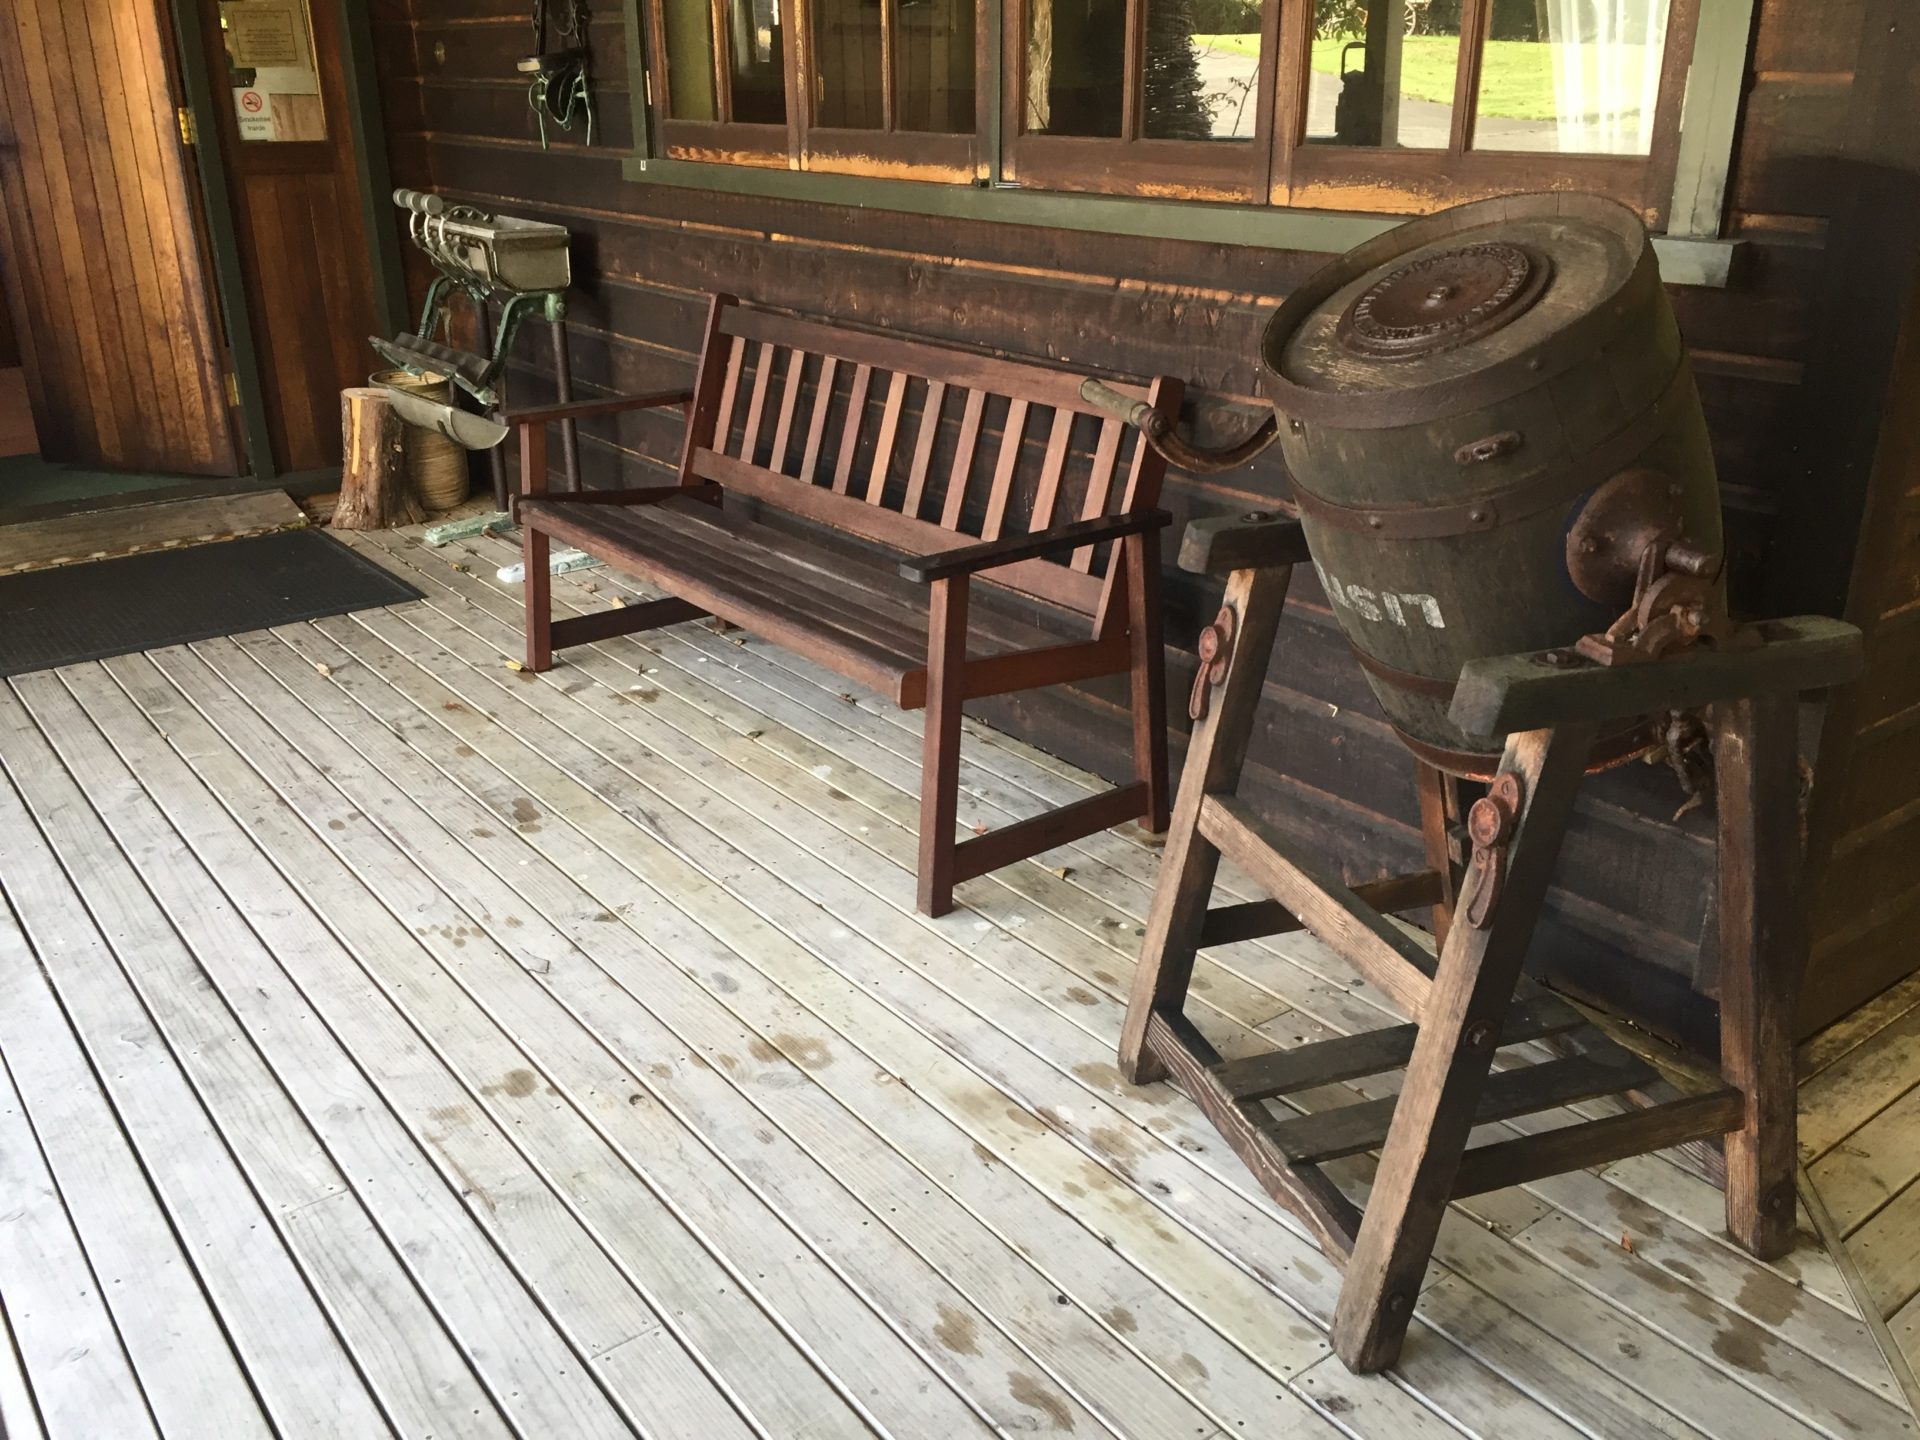 a wooden bench and a barrel on a porch